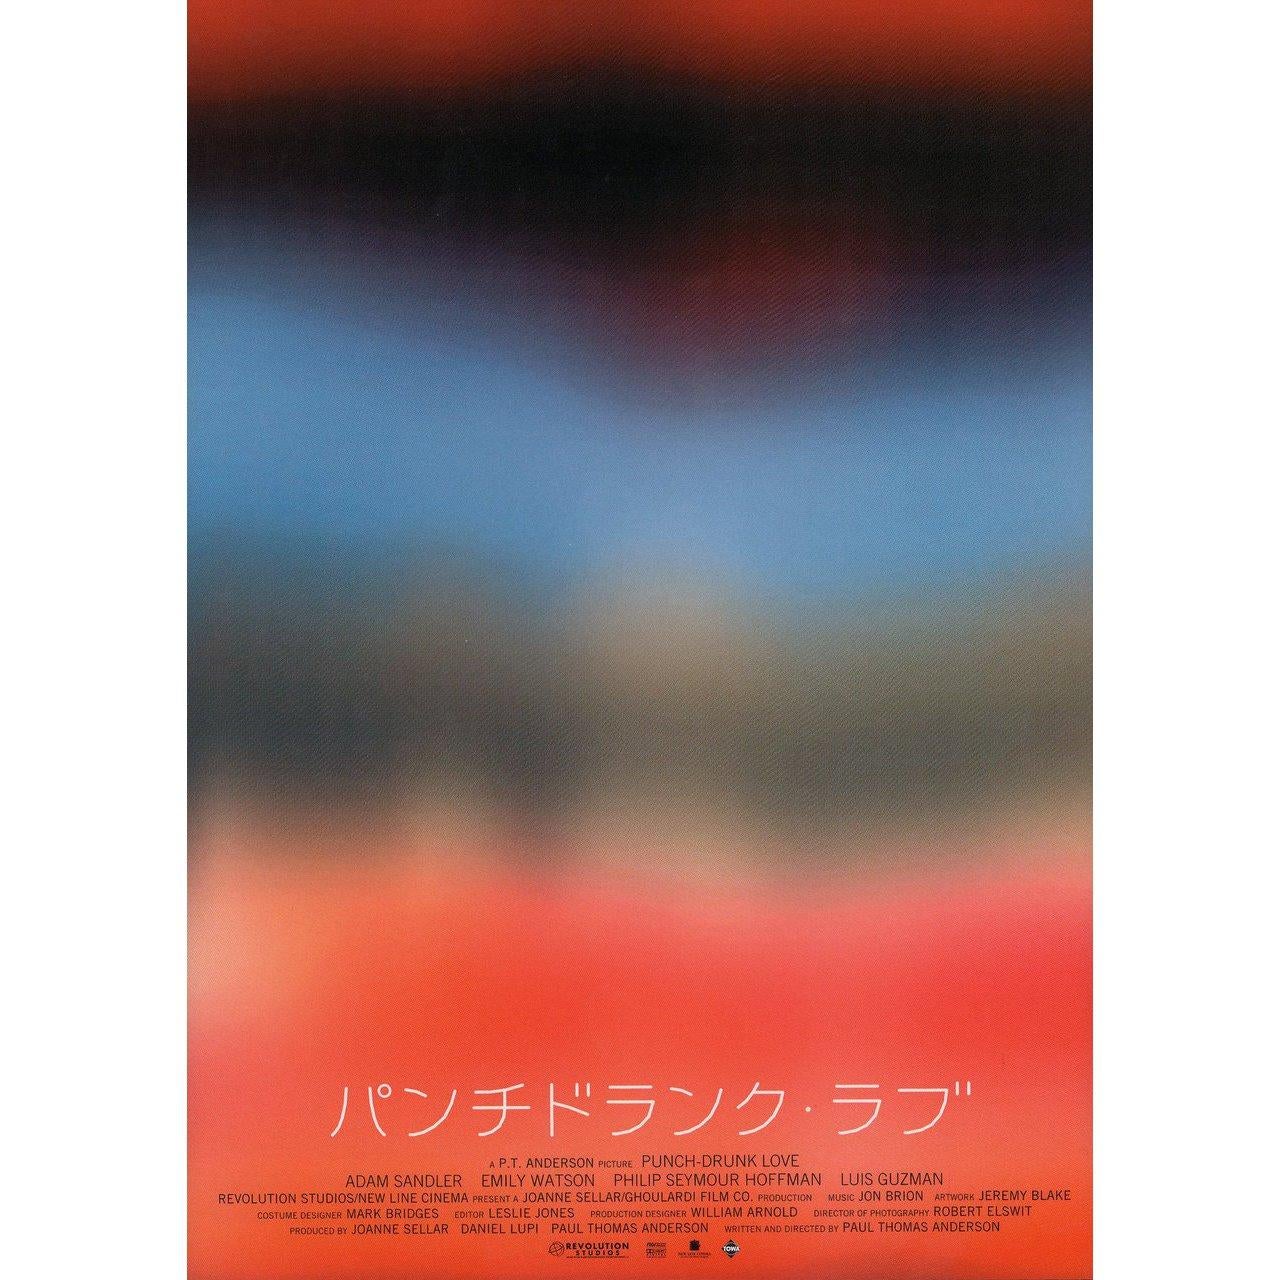 Original 2002 Japanese B5 chirashi flyer by Jeremy Blake for the film Punch-Drunk Love directed by Paul Thomas Anderson with Adam Sandler / Jason Andrews / Don McManus / Emily Watson. Fine condition, rolled. Please note: the size is stated in inches